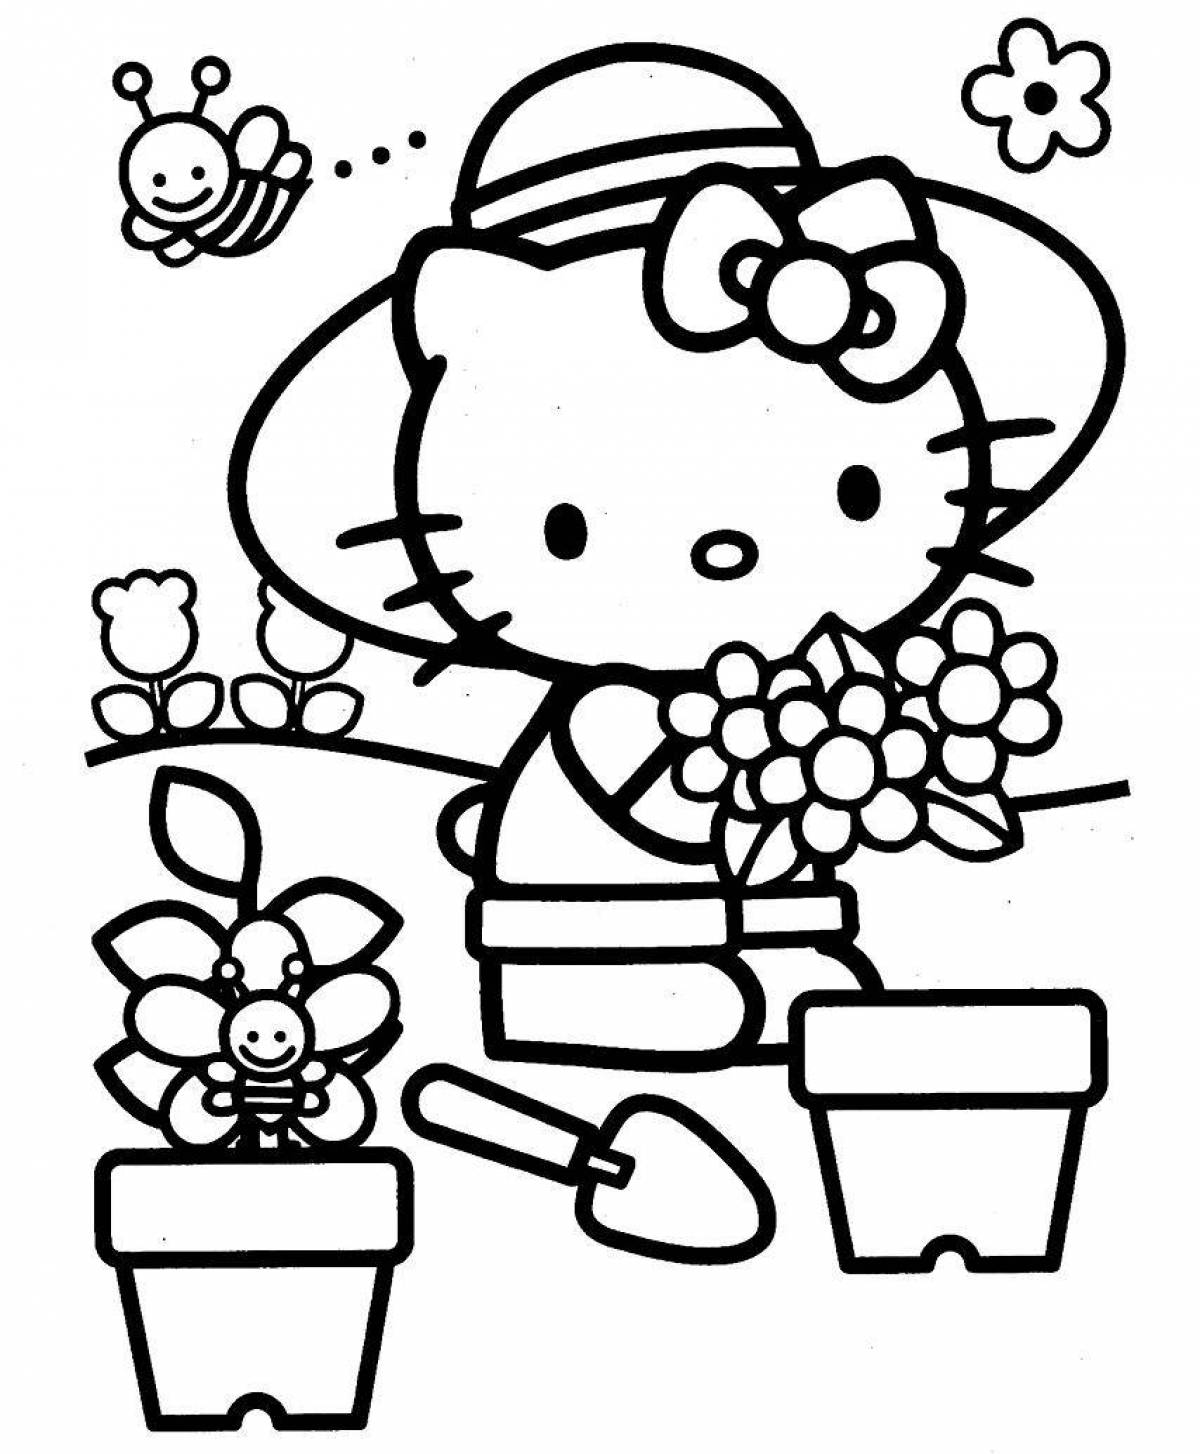 Charming hello kitty with heart coloring book